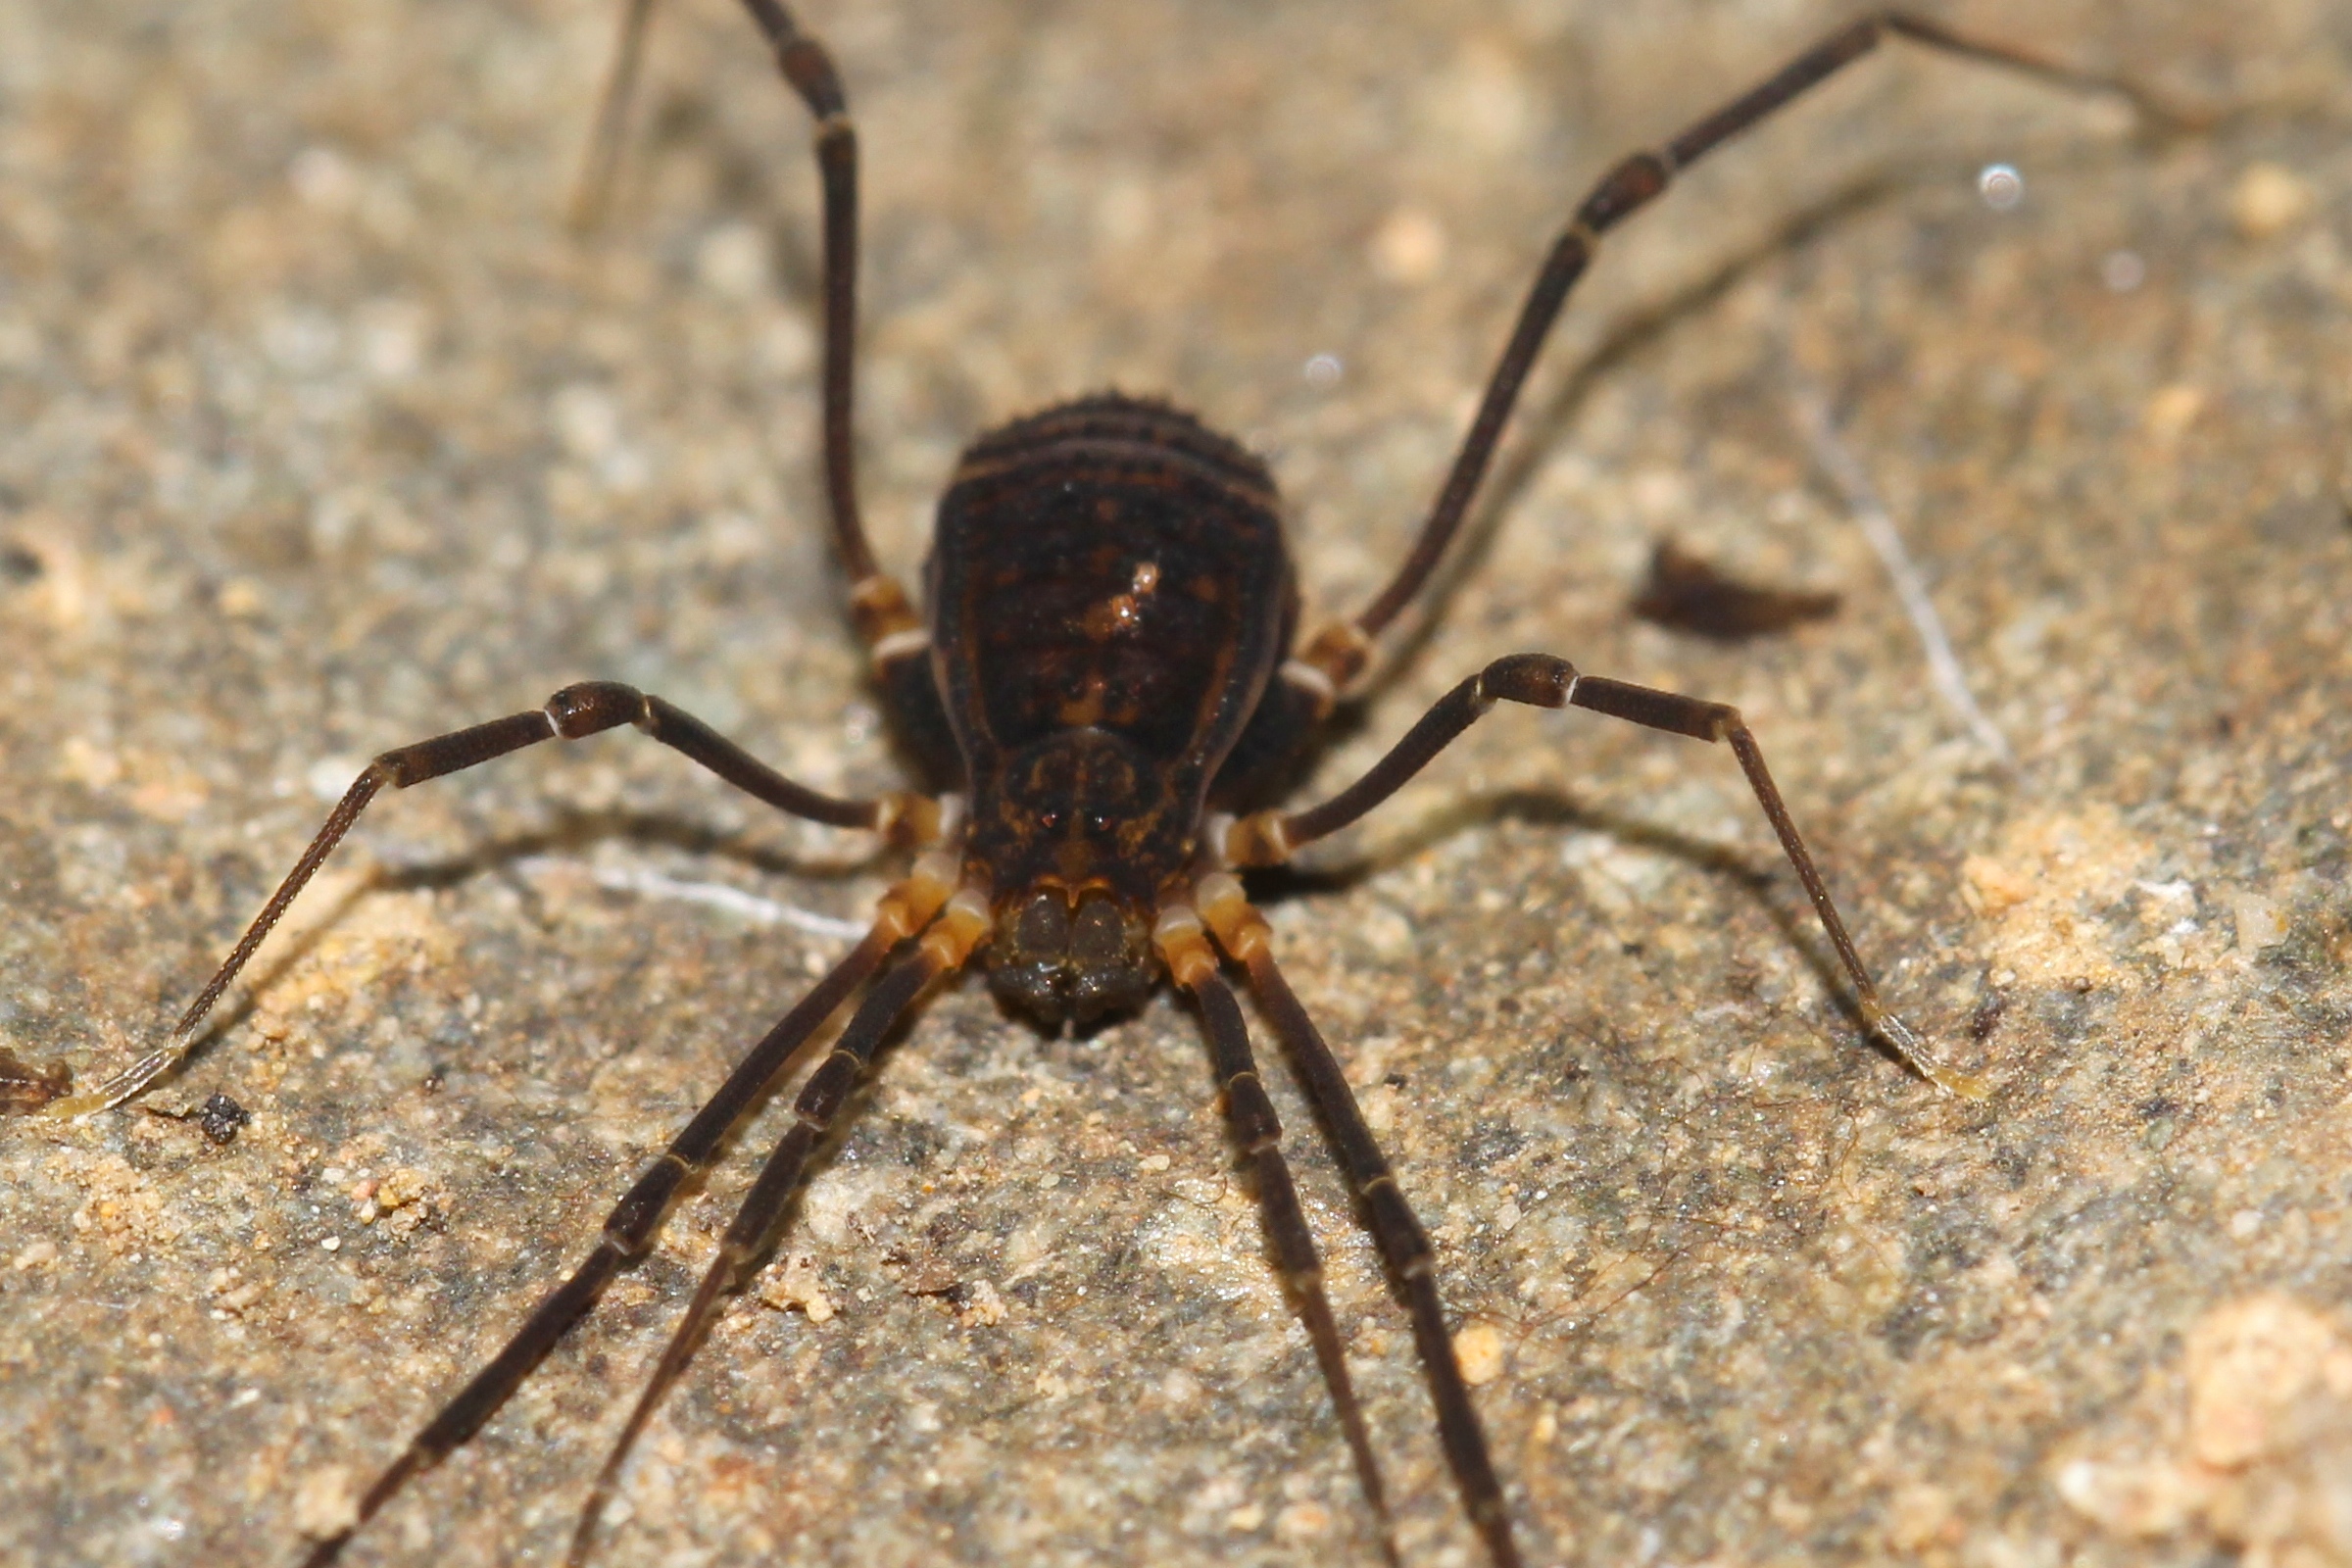 Unidentified harvestman poses on its rock. Photograph Malcolm Tattersall.